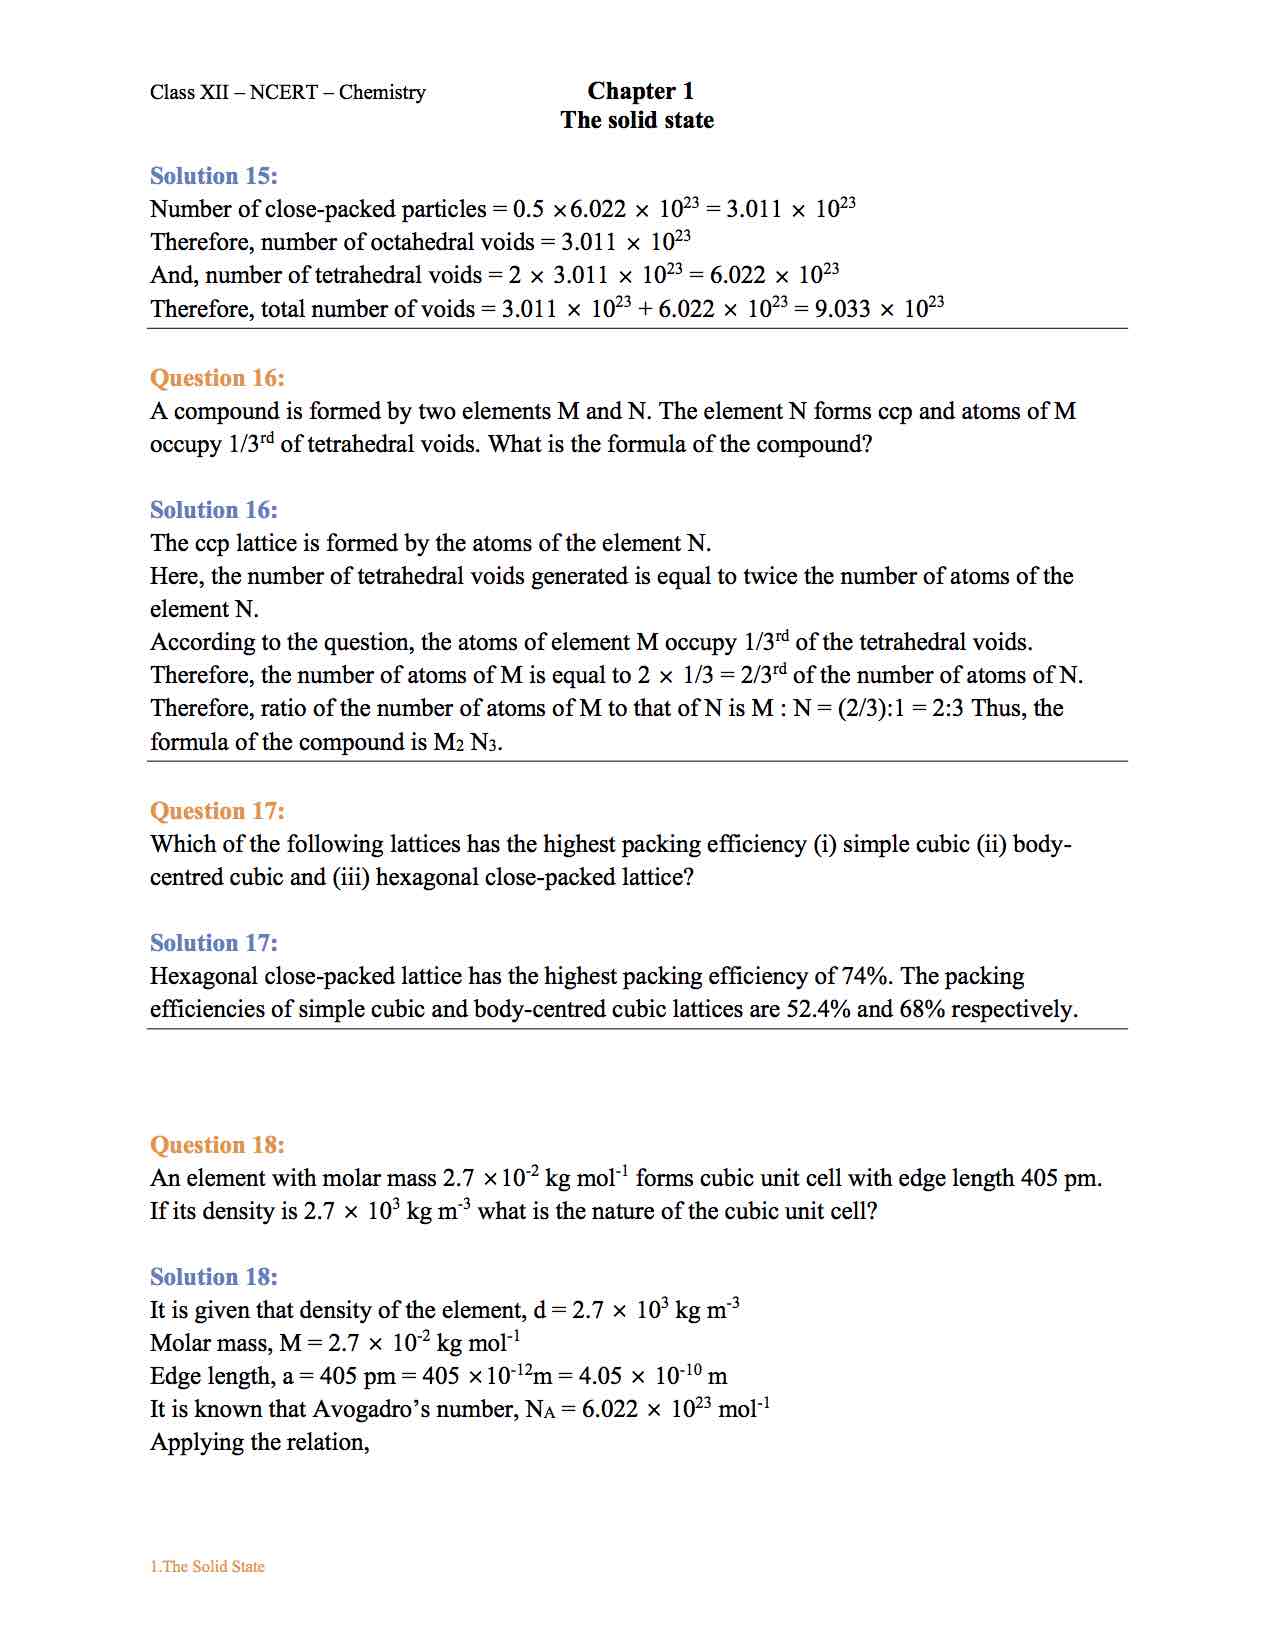 case study questions class 12 chemistry chapter 1